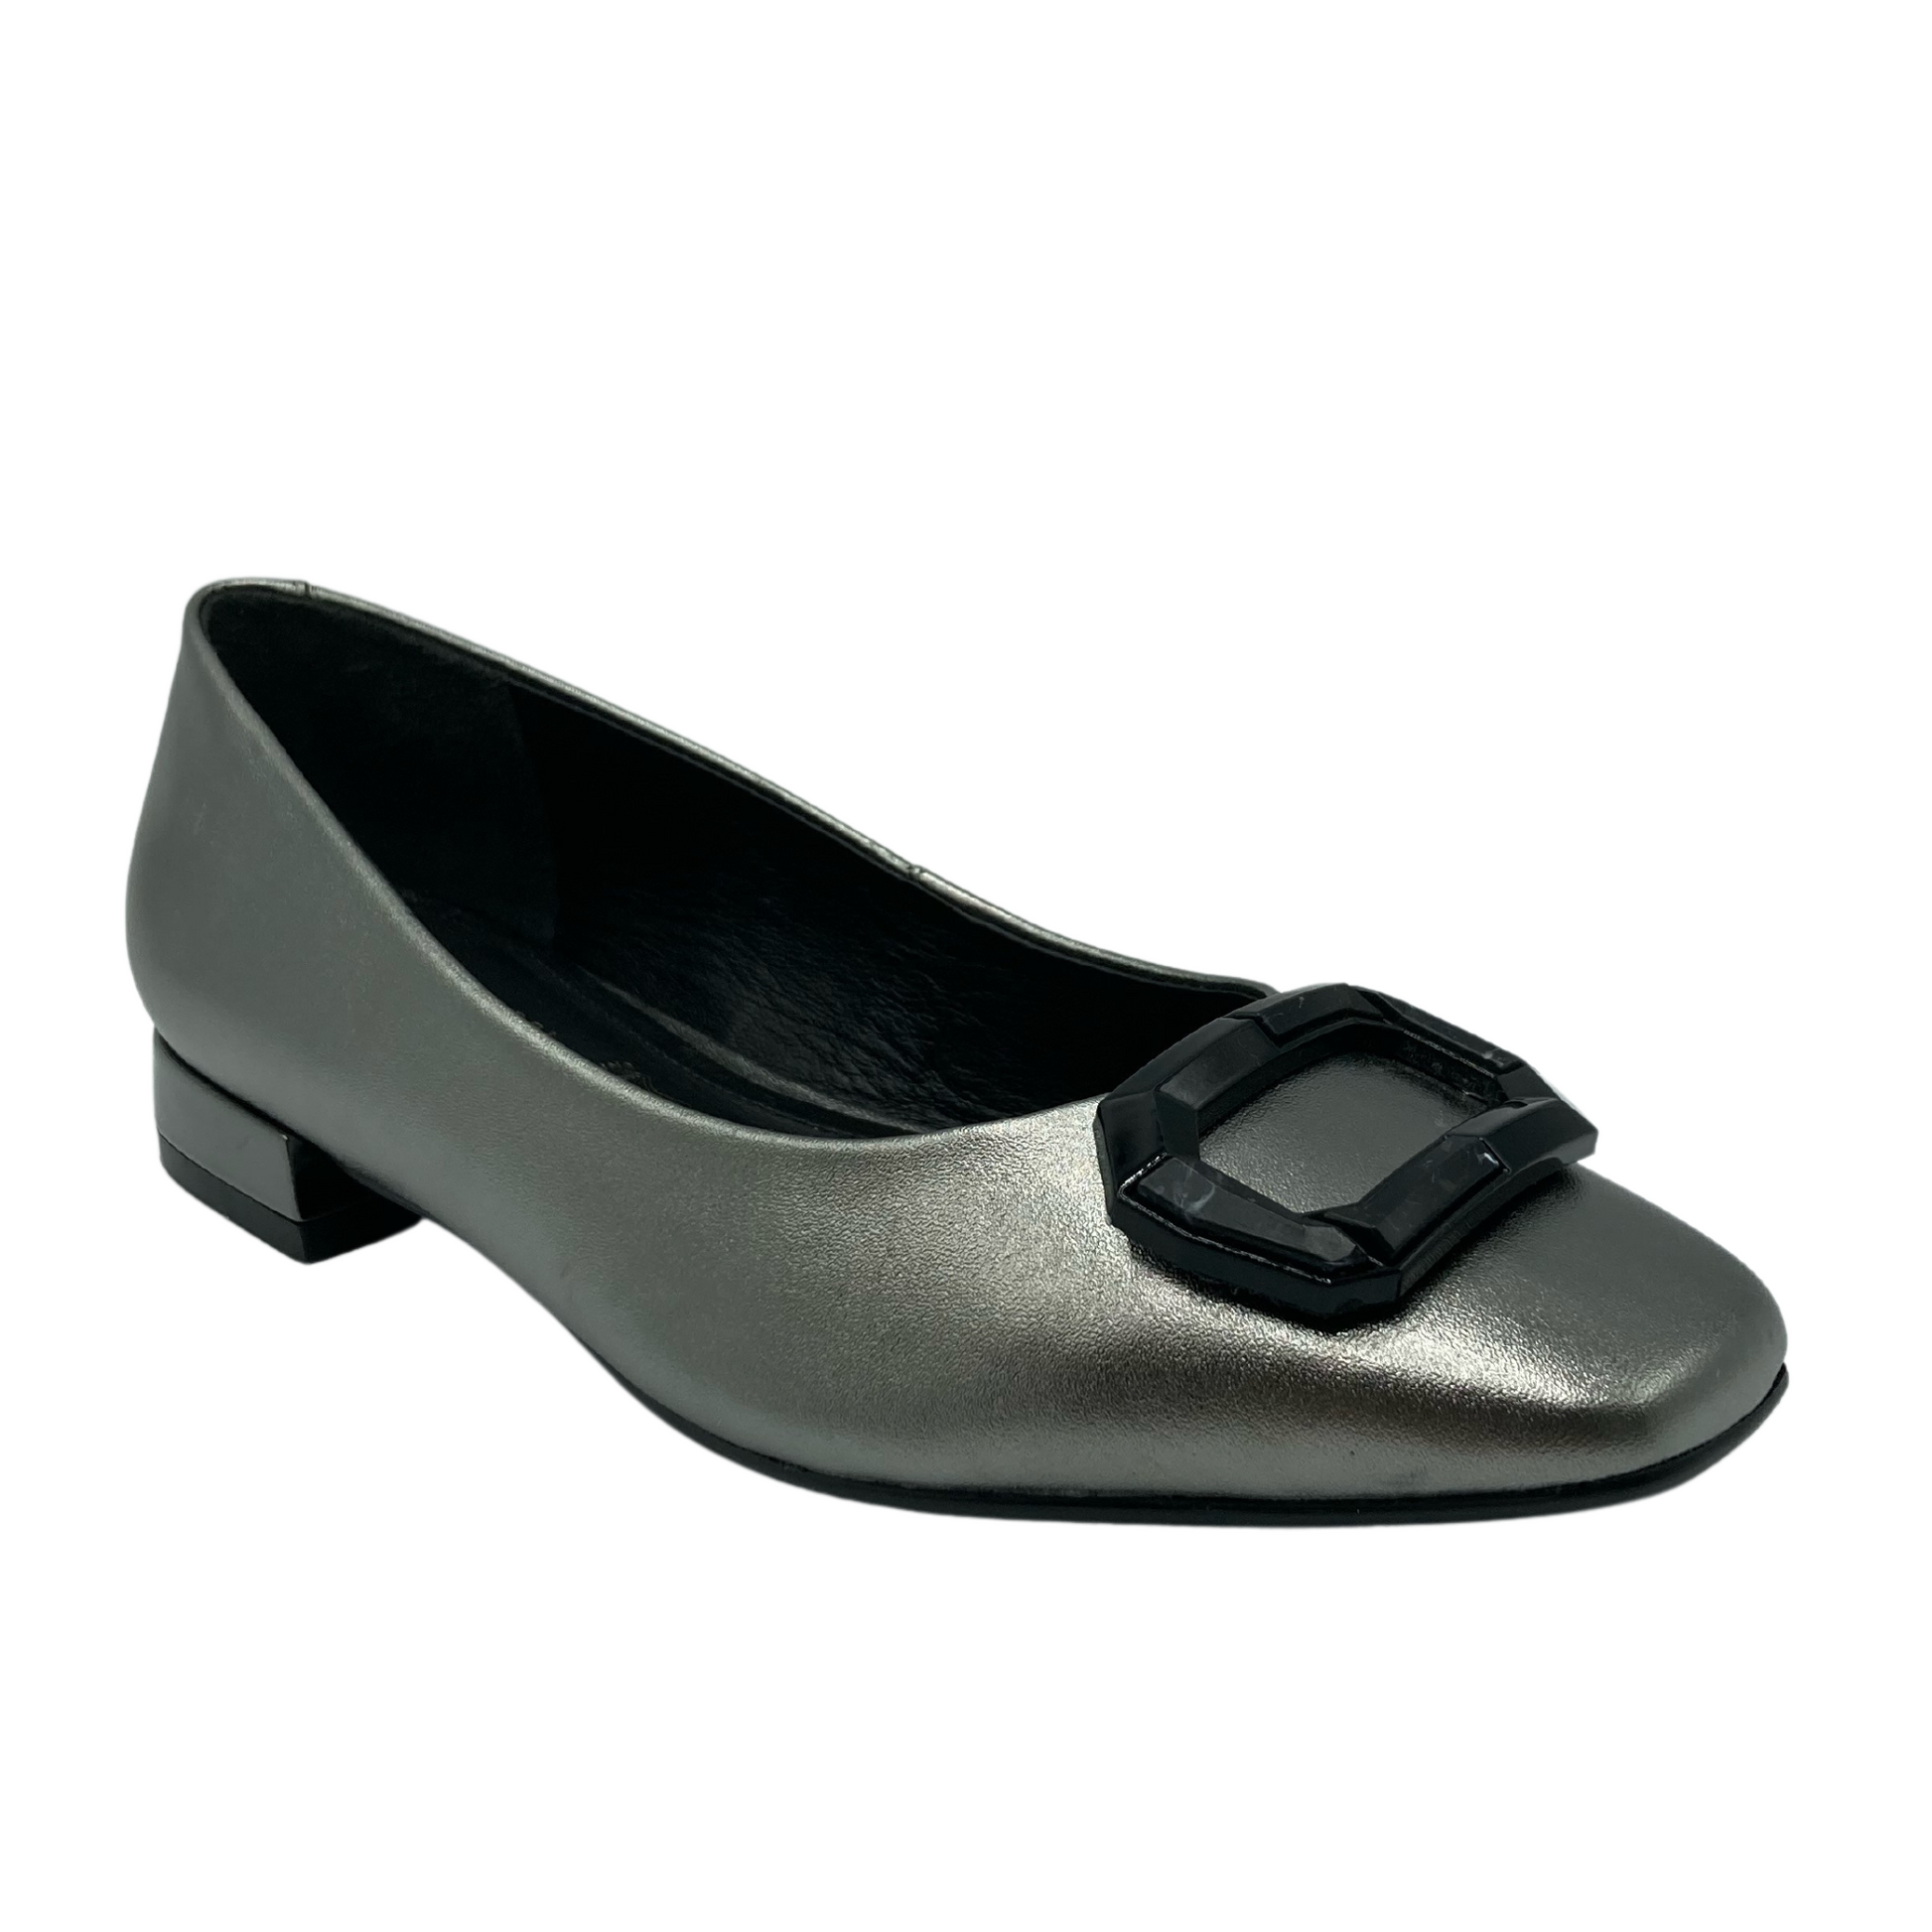 45 degree angled view of metallic silver ballet flat with square toe and black buckle detail on the toe 